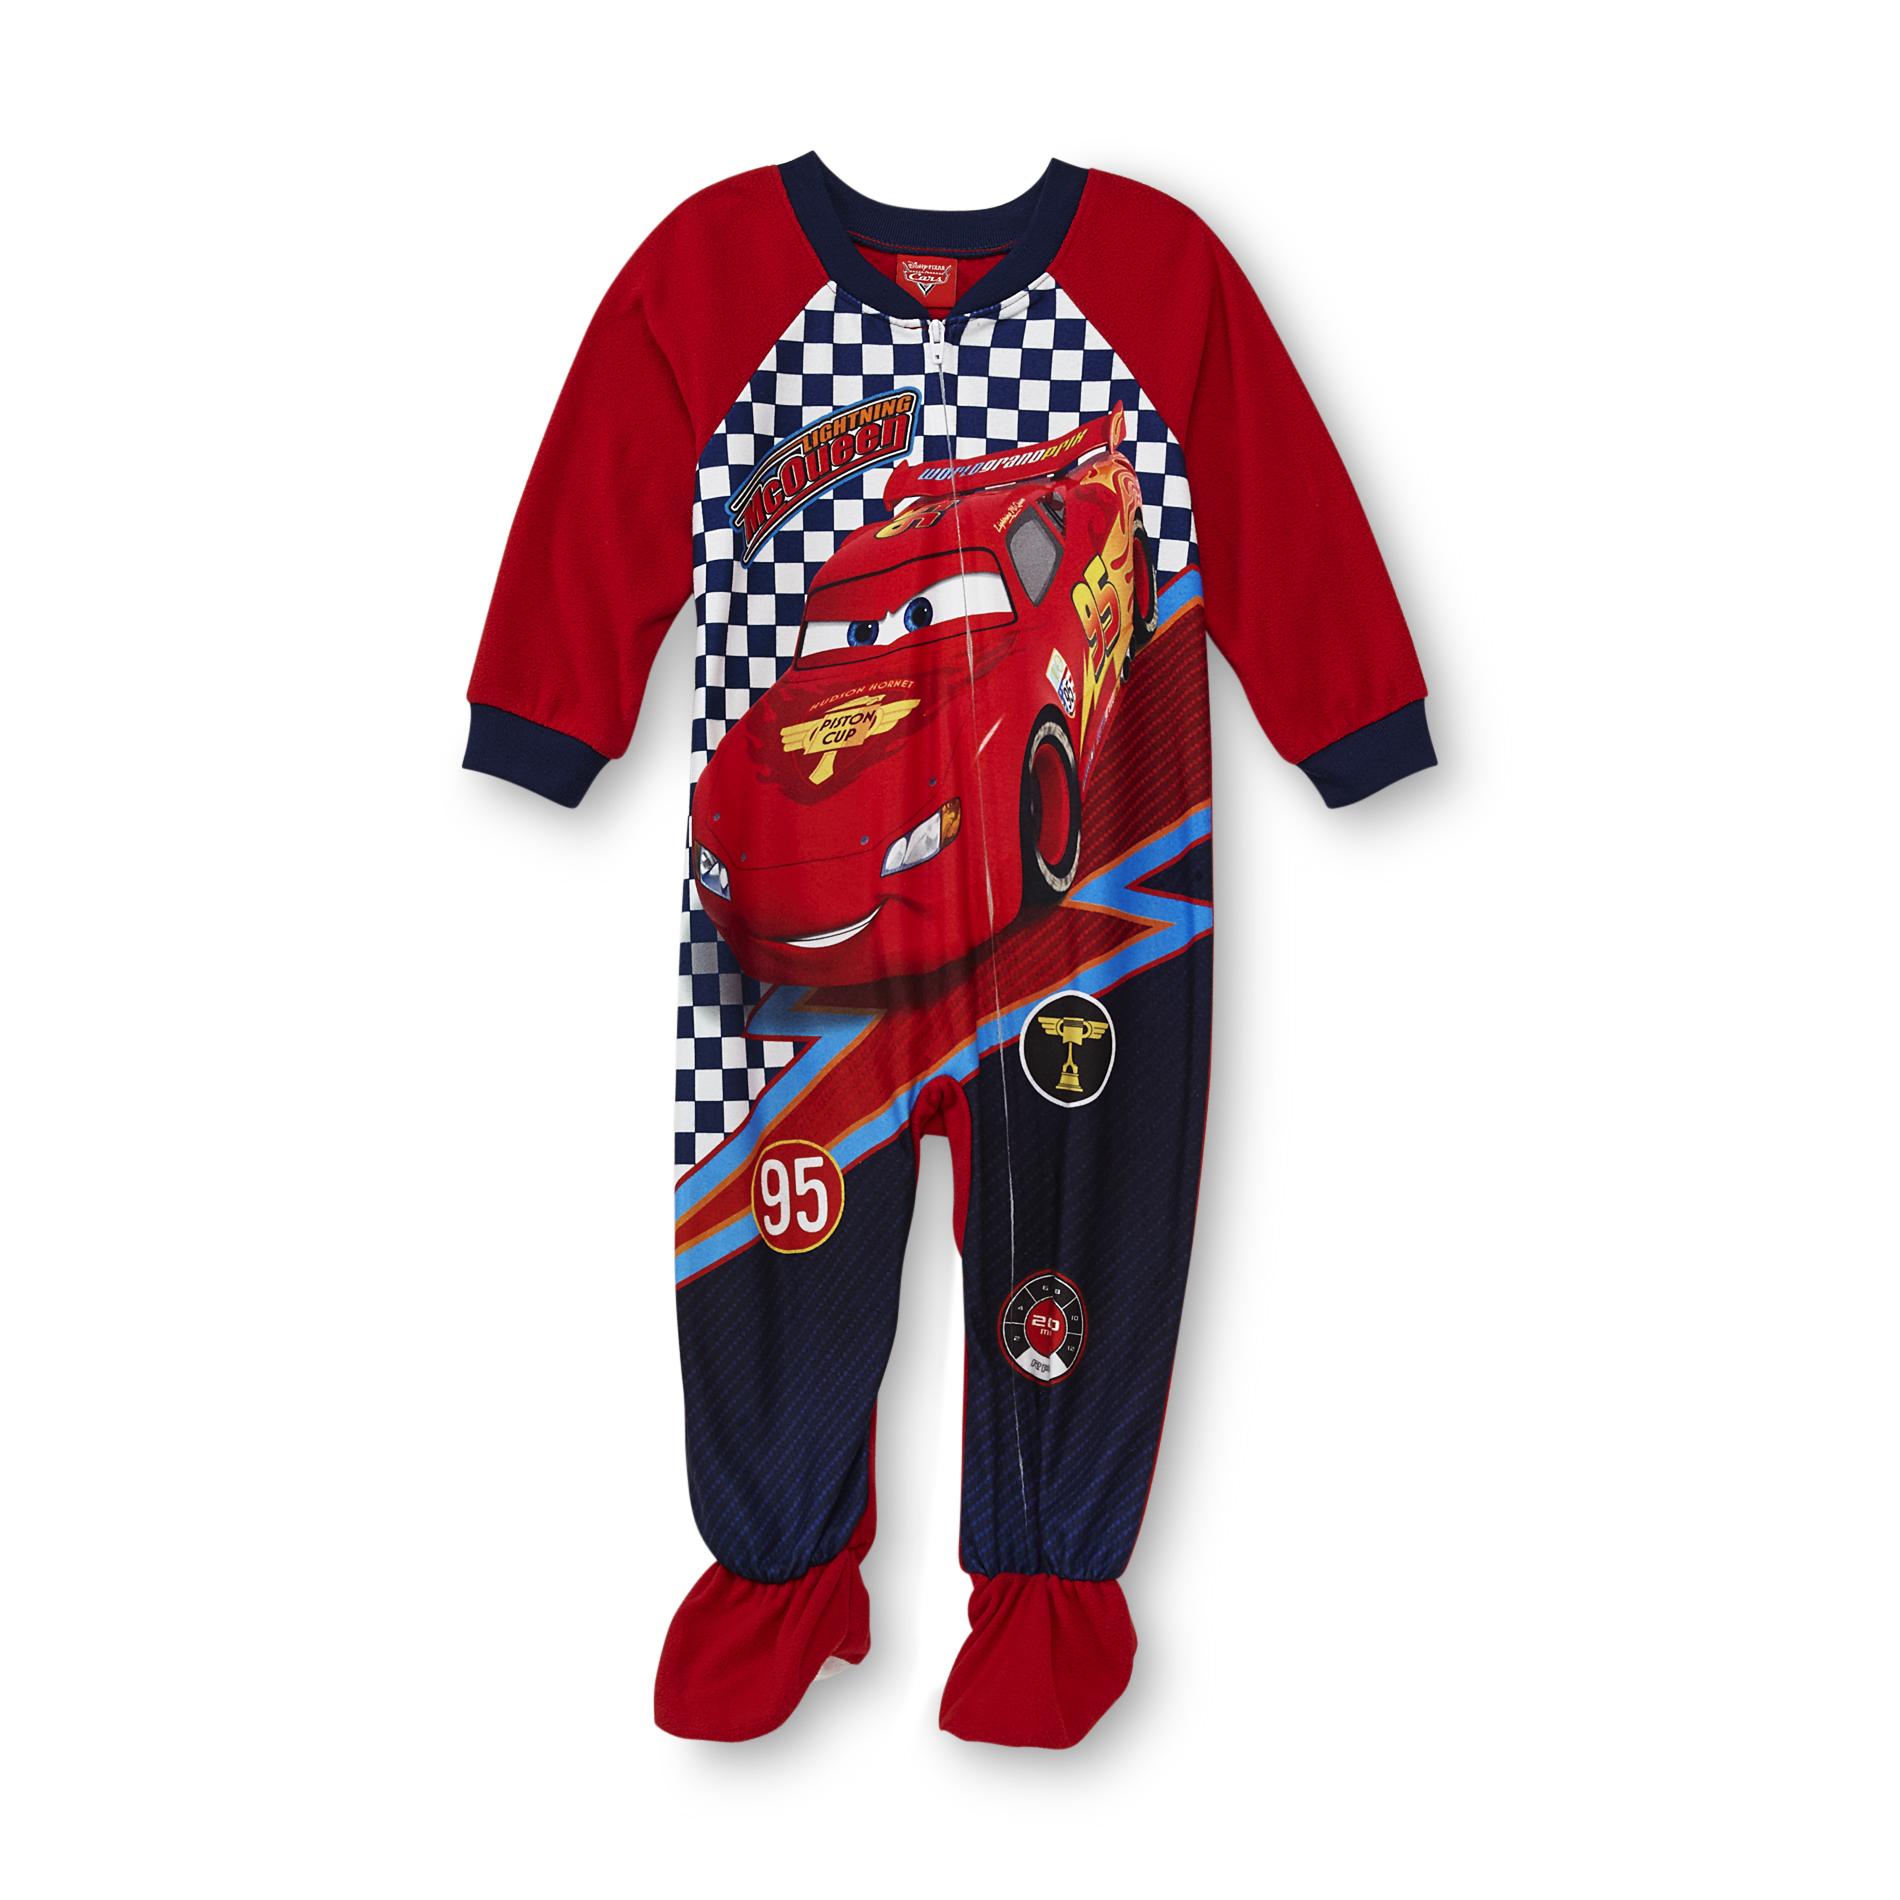 Disney Cars Infant & Toddler Boy's Footed Pajamas - Lightning McQueen